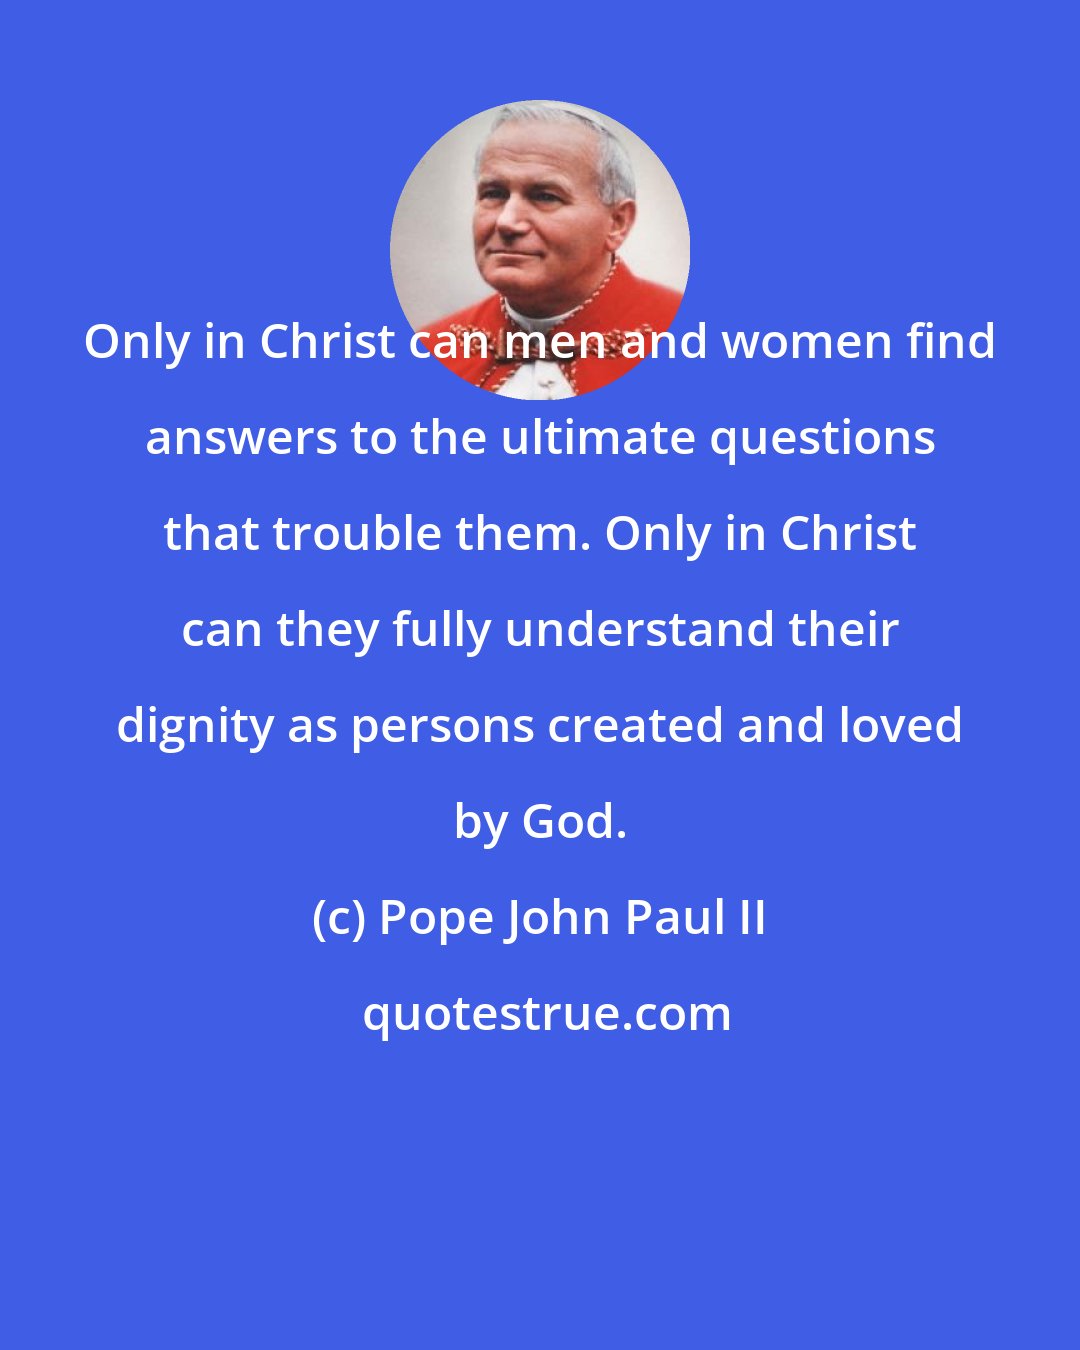 Pope John Paul II: Only in Christ can men and women find answers to the ultimate questions that trouble them. Only in Christ can they fully understand their dignity as persons created and loved by God.